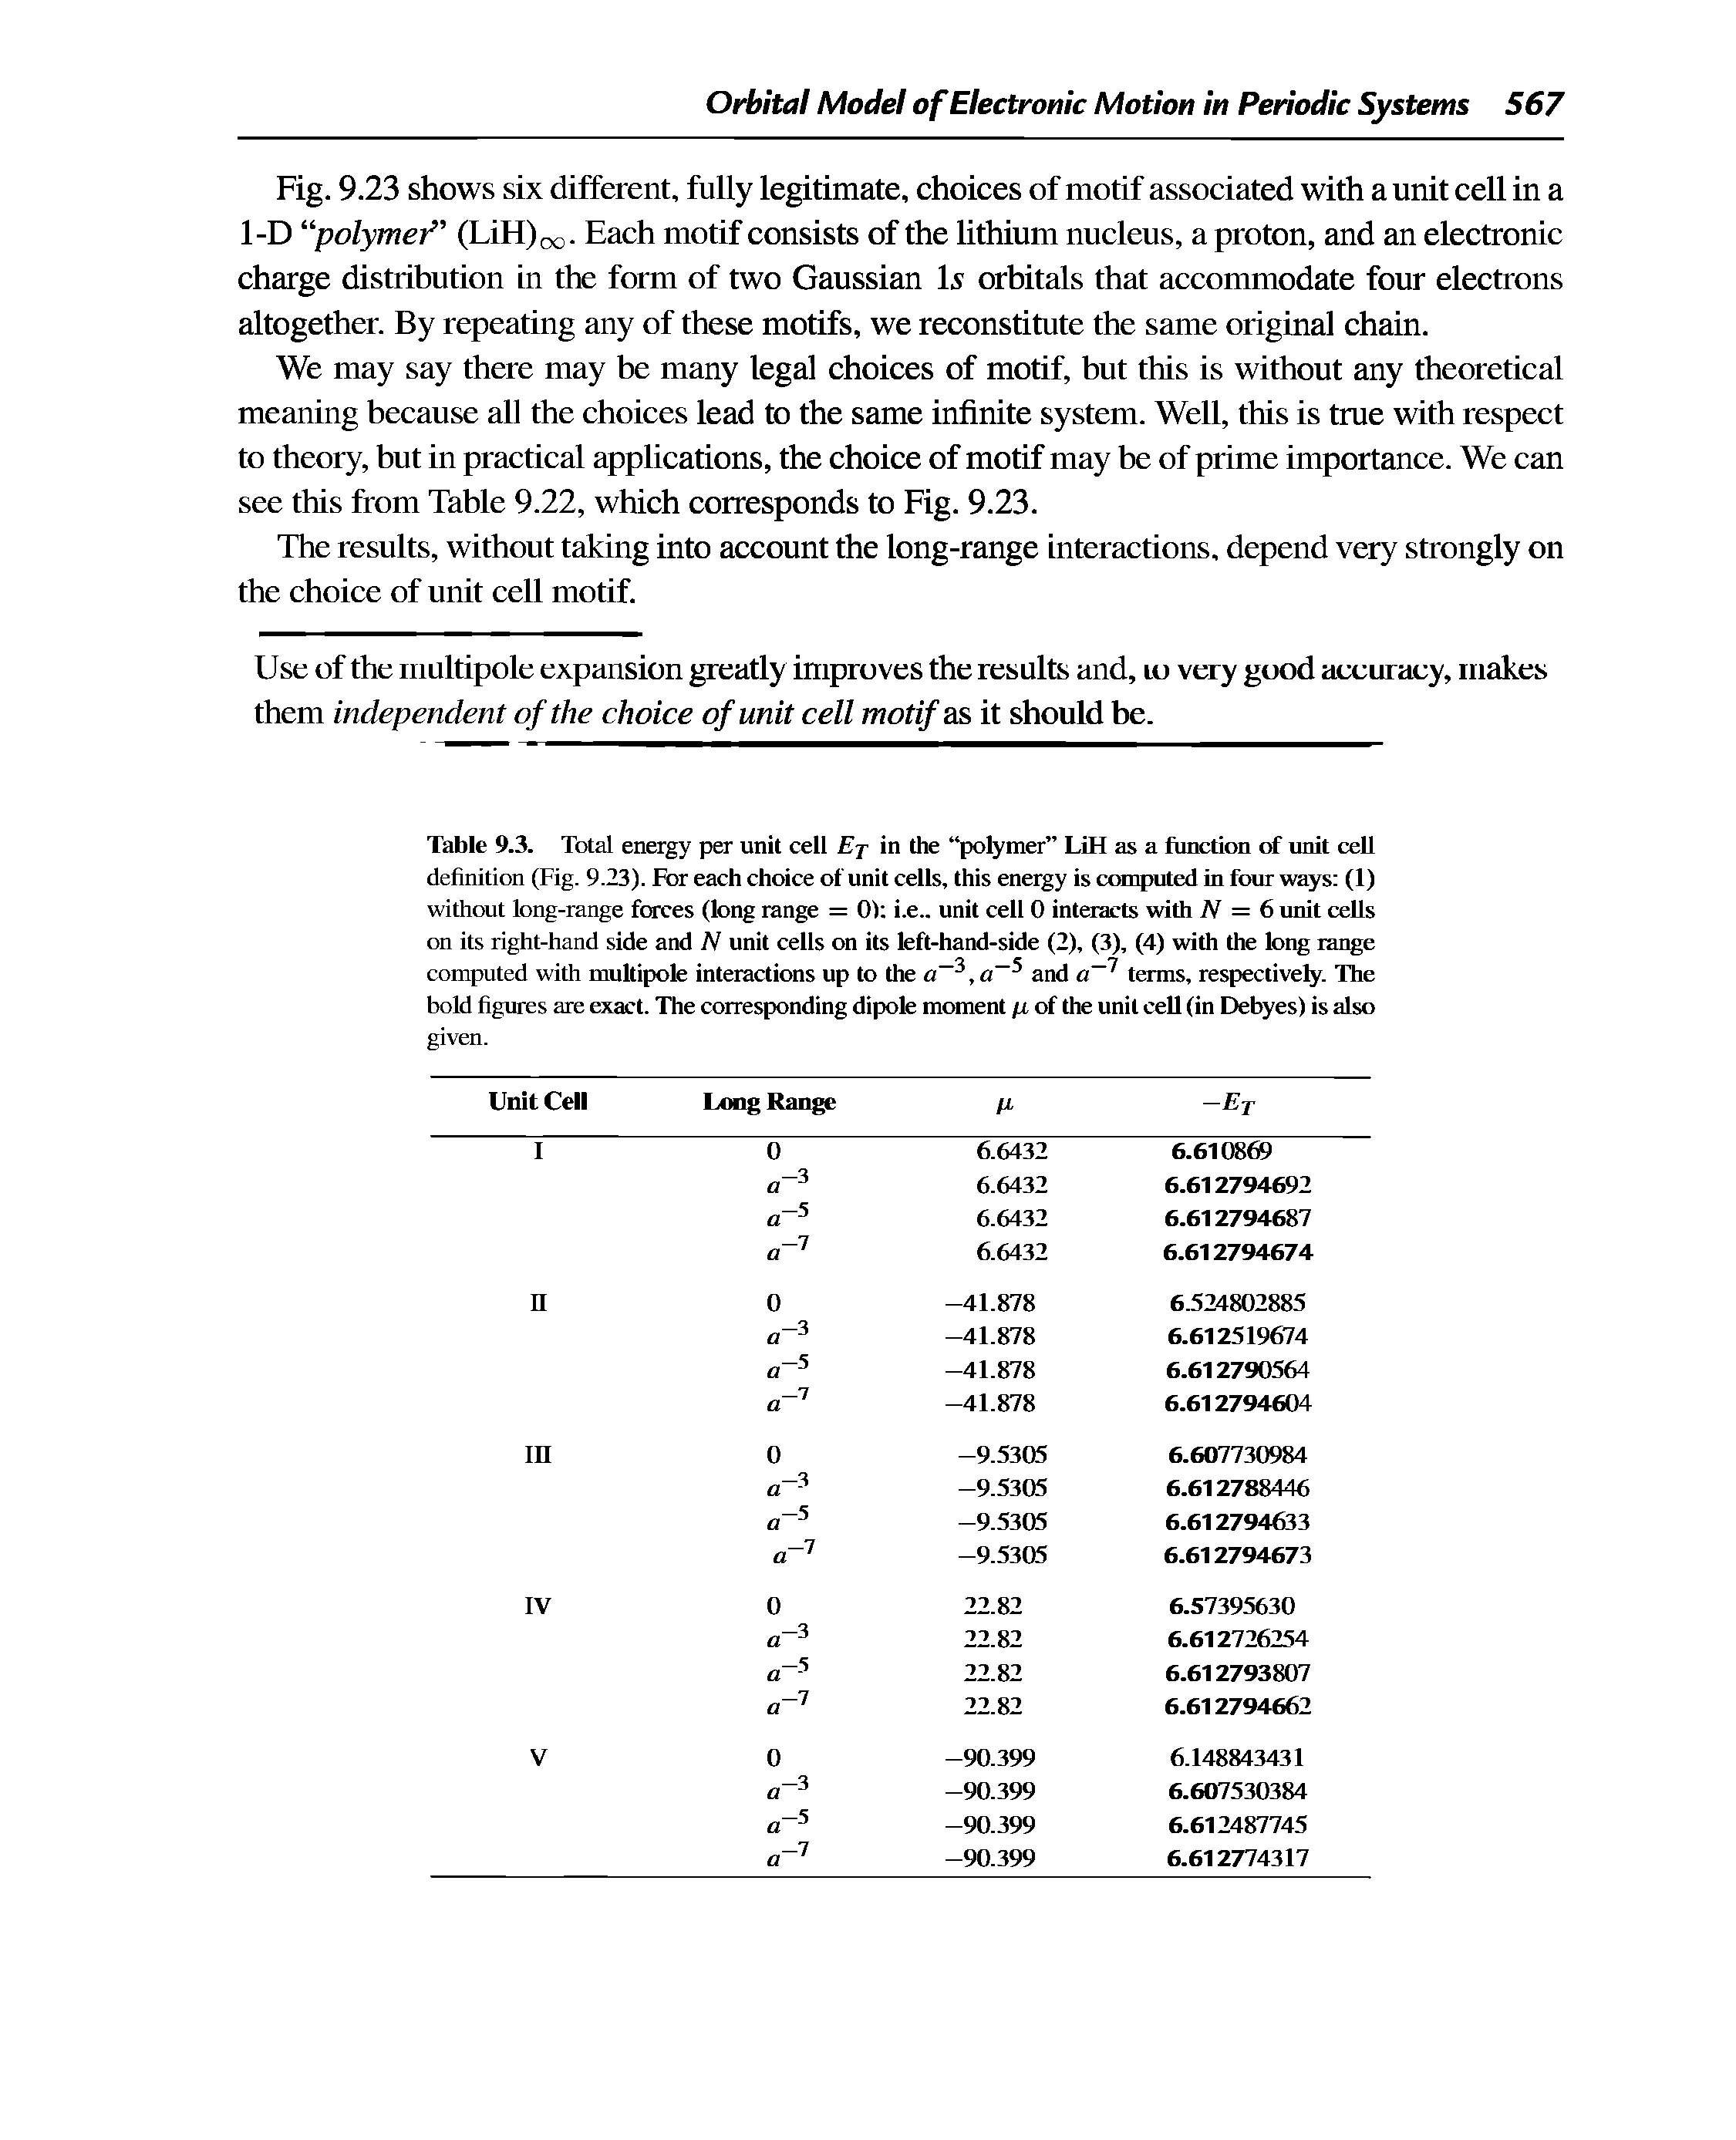 Table 9.3. Total energy per unit cell Ej- in the pofymer LiH as a function of unit cell definition (Fig. 9.23). For each choice of unit cells, this energy is computed in four ways (1) without long-range forces (long range = 0) i.e.. unit cell 0 interacts with N = 6 unit cells on its right-hand side and N unit cells on its left-hand-side (2), (3), (4) with the long range computed with multipole interactions up to the and a terms, respective. The...